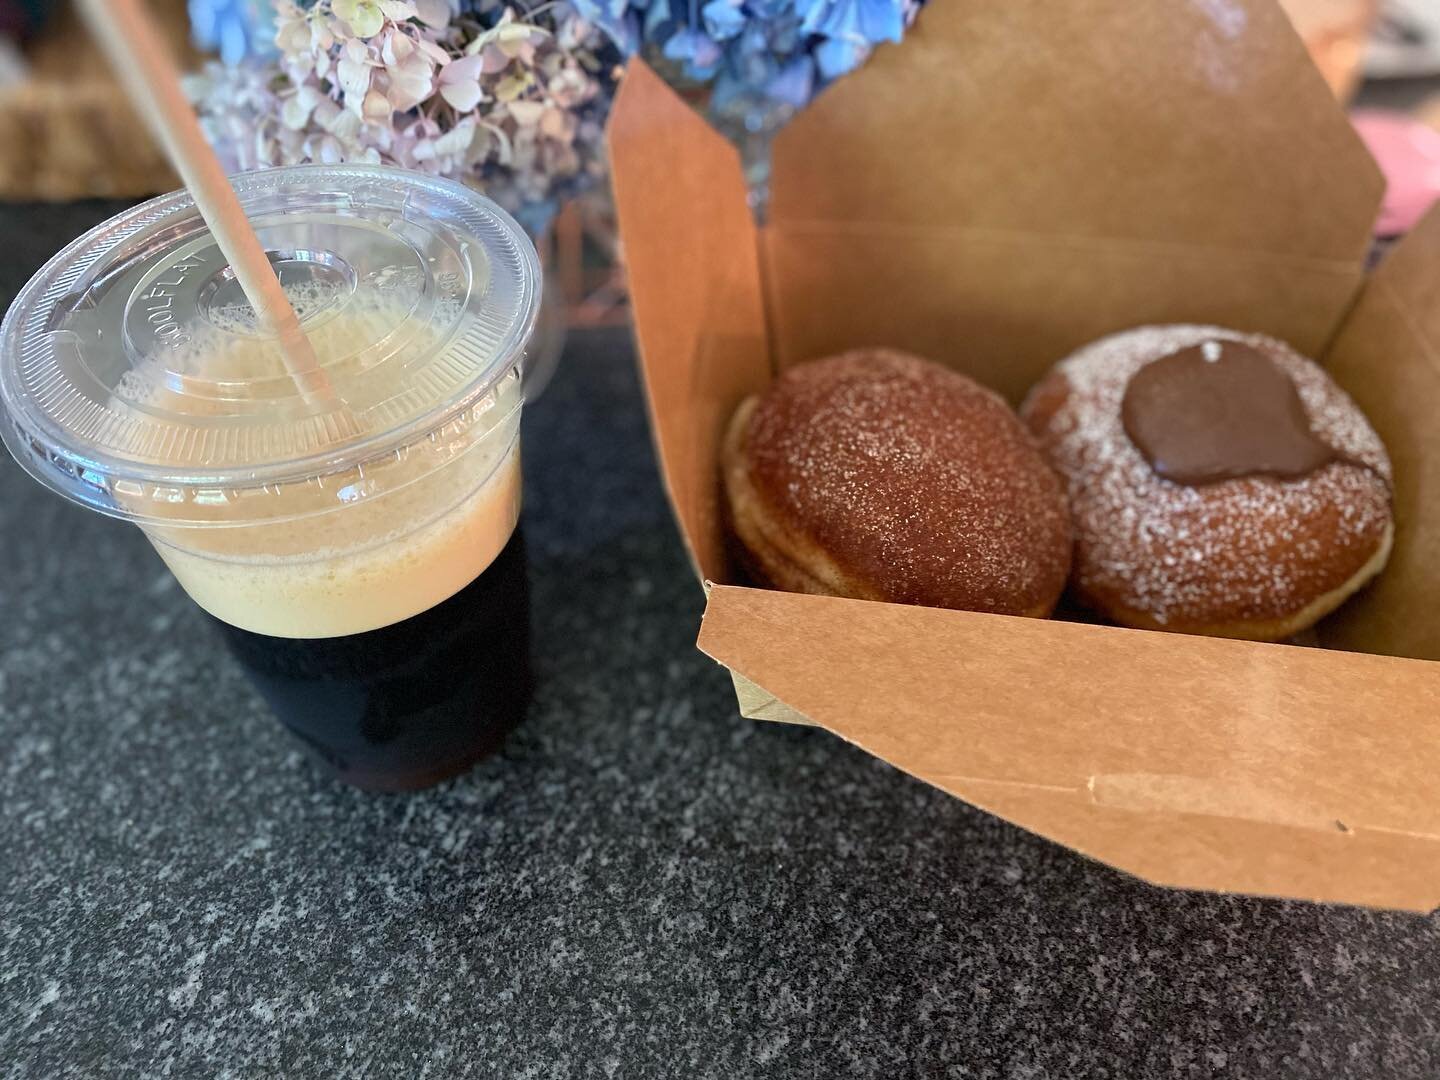 🍑Champion Local Business🍑

We love starting the weekend at @panedolcettiwilbraham 

Our favorites - Nitro Cold Brew, Bomboloni, (both pictured) and their signature Cinnamon Buns. 

You can always find fresh baked bread, panini, gourmet pastry, coff